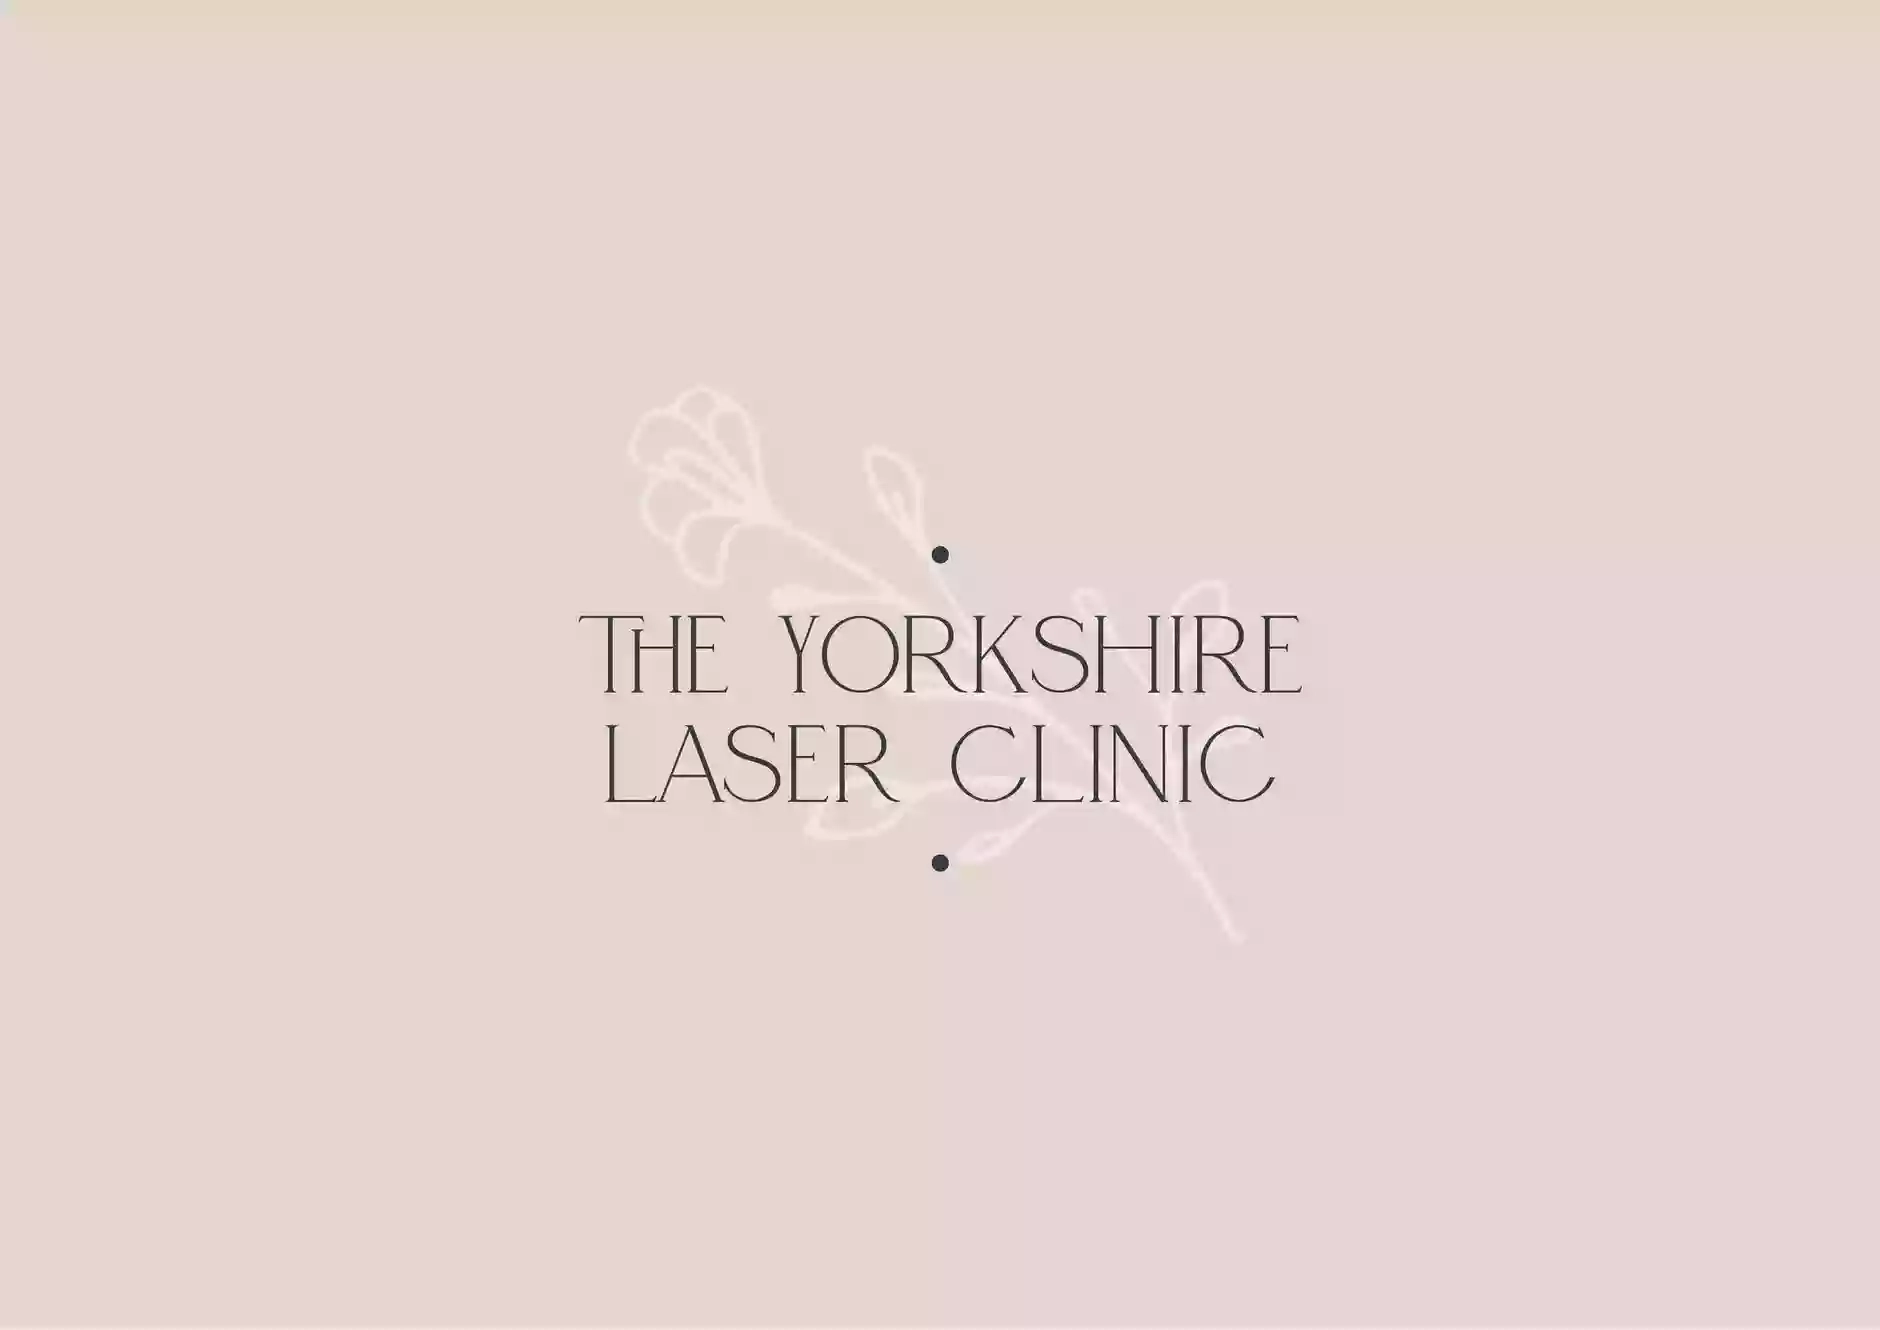 The Yorkshire Laser Clinic